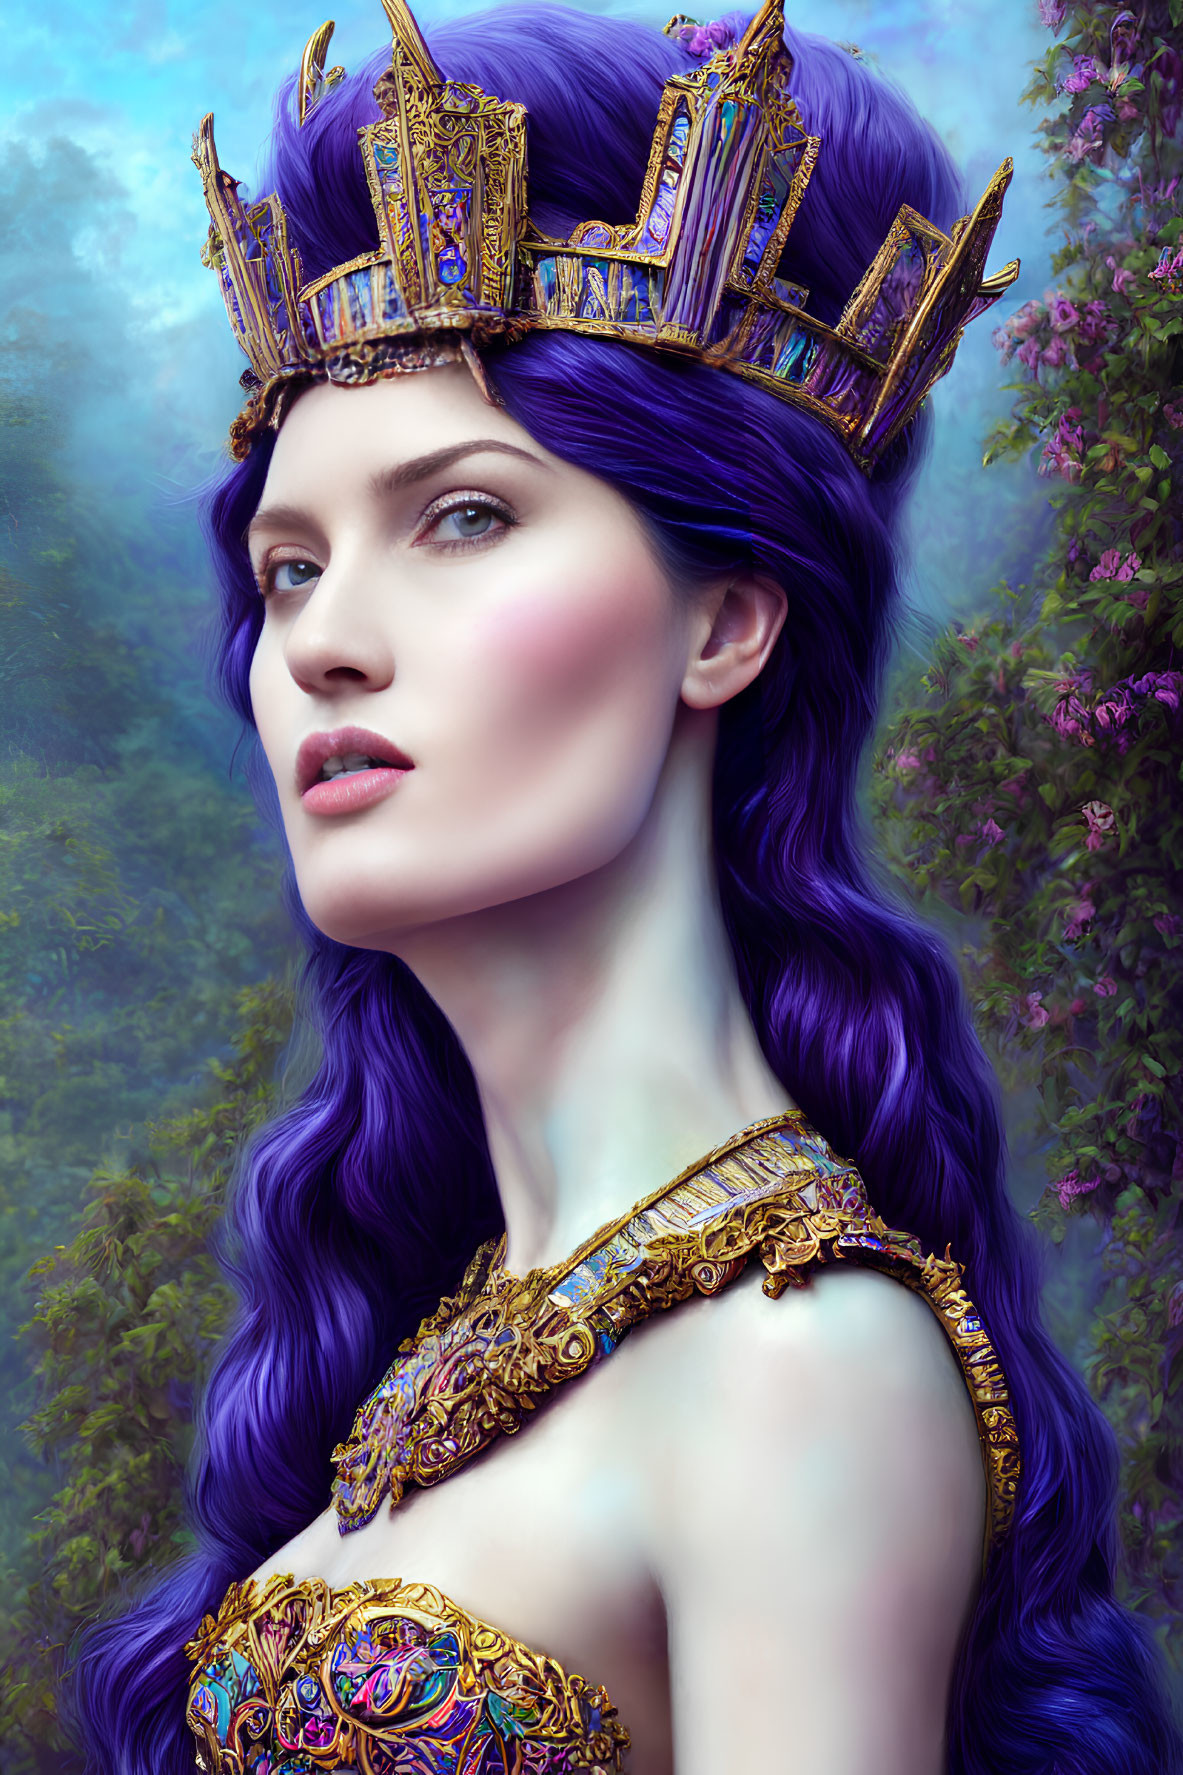 Regal figure with purple hair and golden crown in floral setting